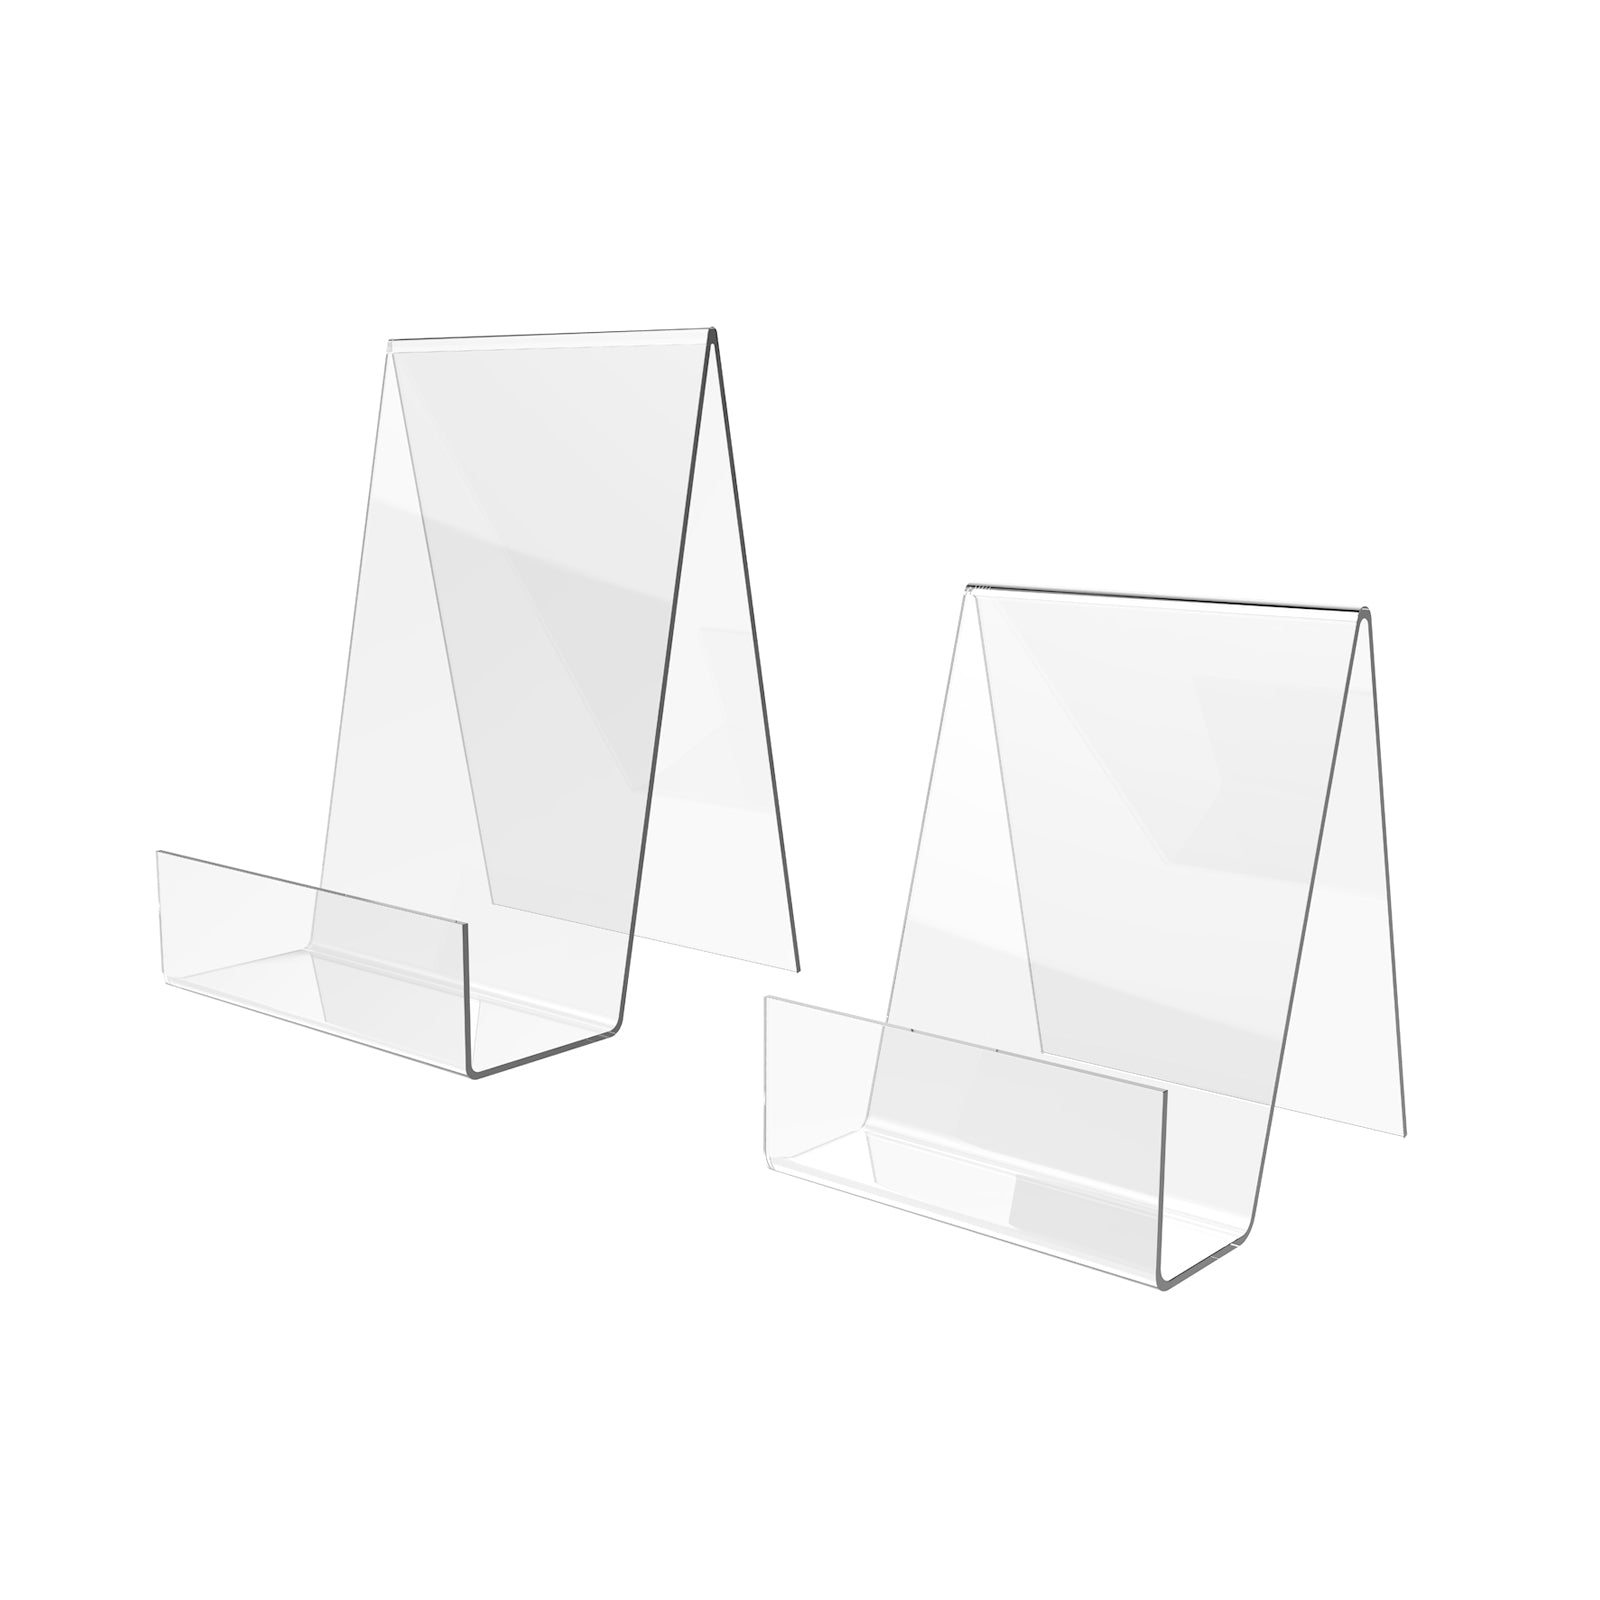 Acrylic Book Stand with Ledge - Clear Display Easel for Pictures